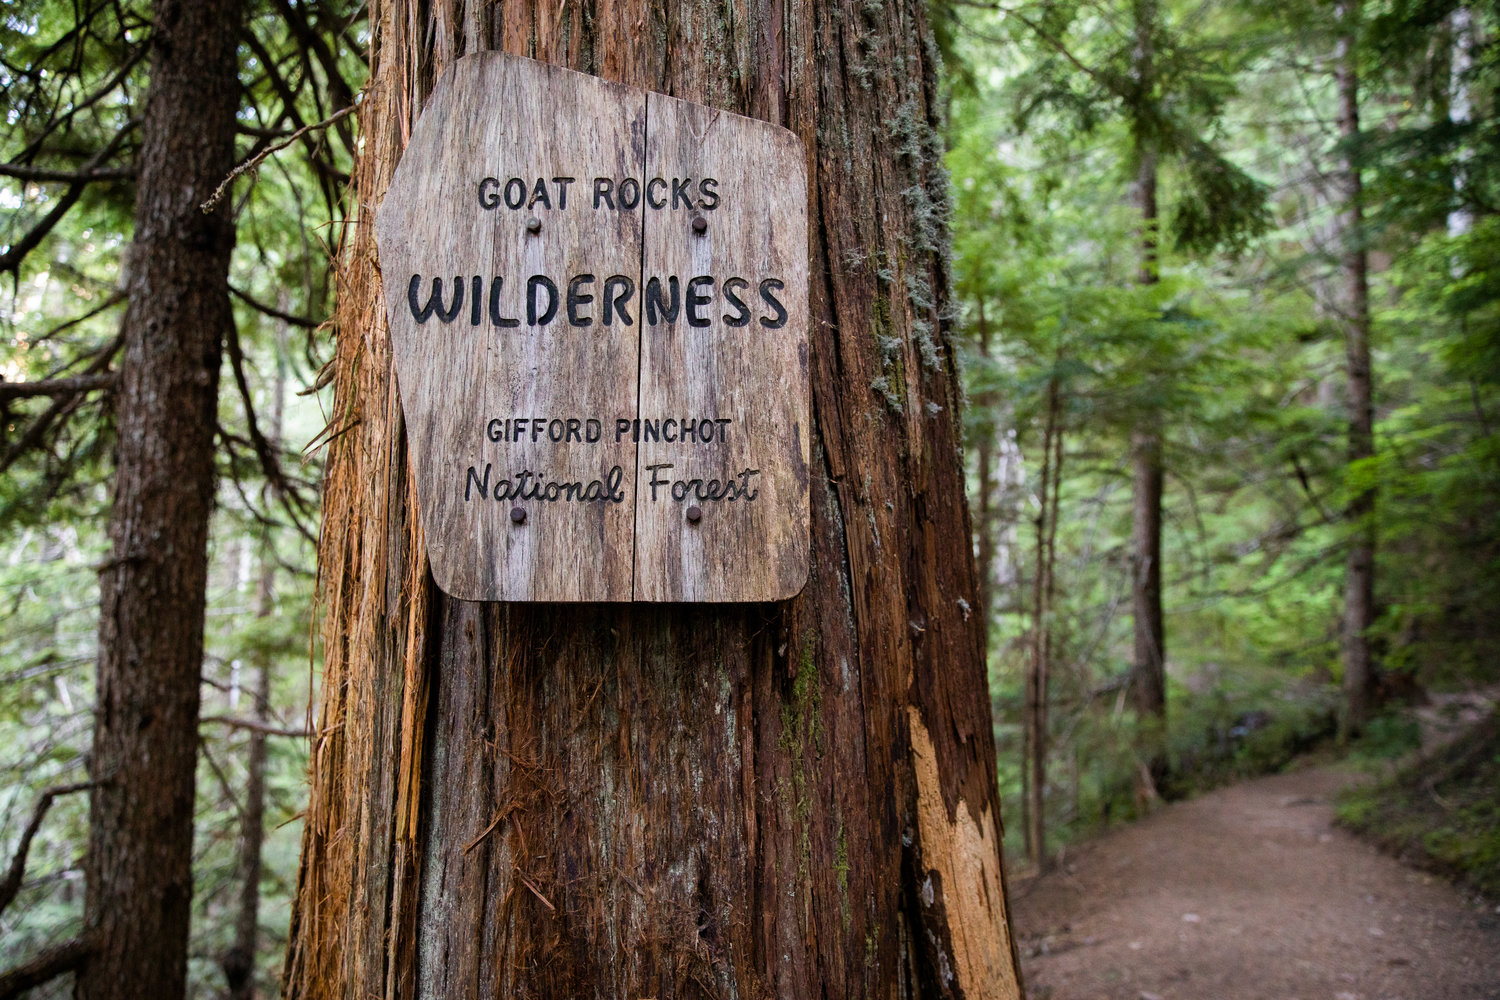 Gifford Pinchot National Forest signage for the Goat Rocks Wilderness hangs on a tree along a trail Wednesday.